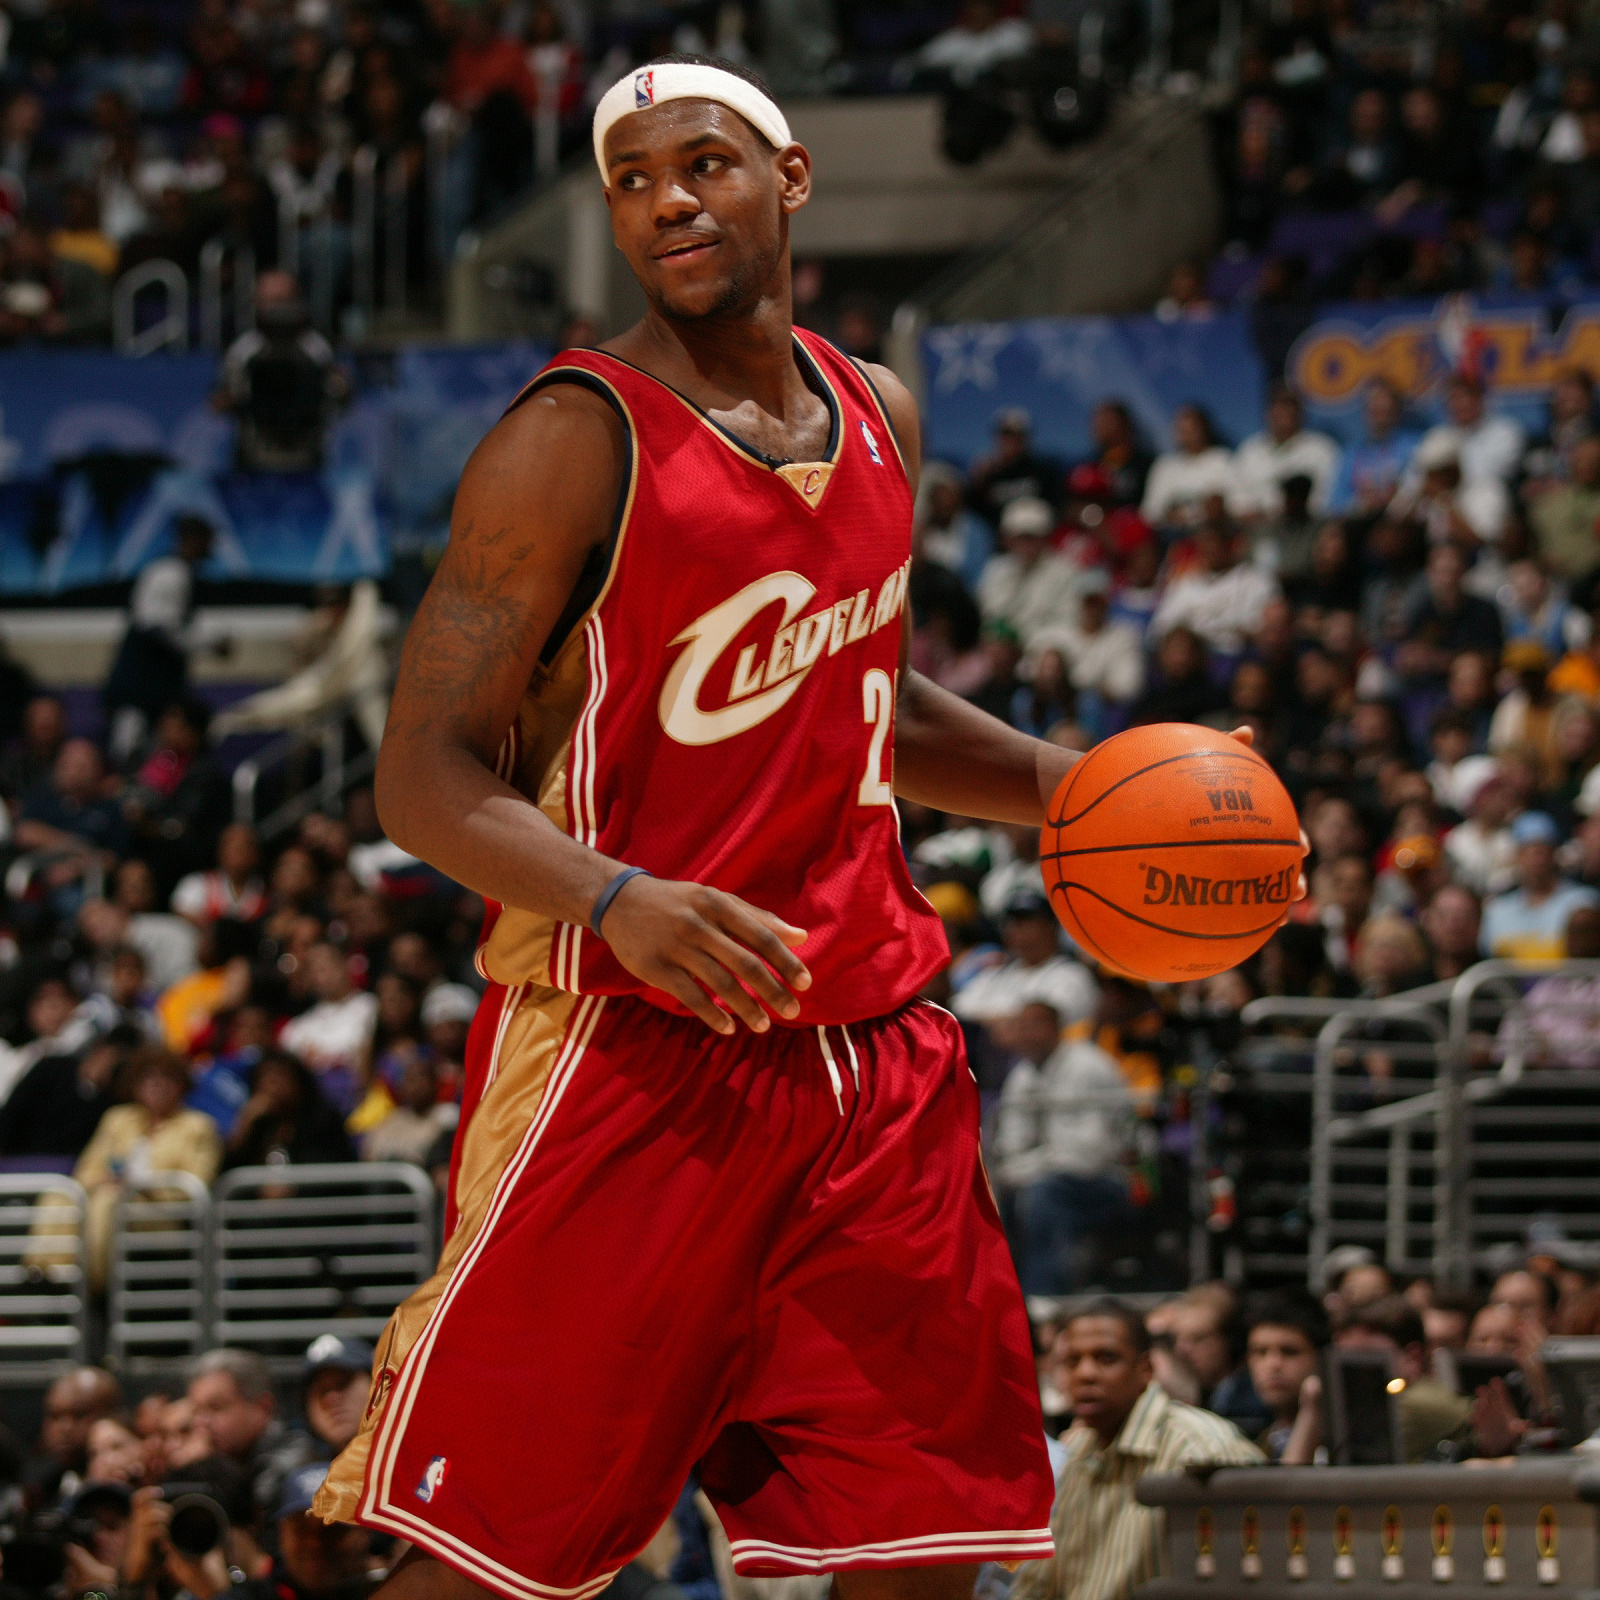 LeBron James Autographed Basketball W/ H.S. Teammates Hits Auction